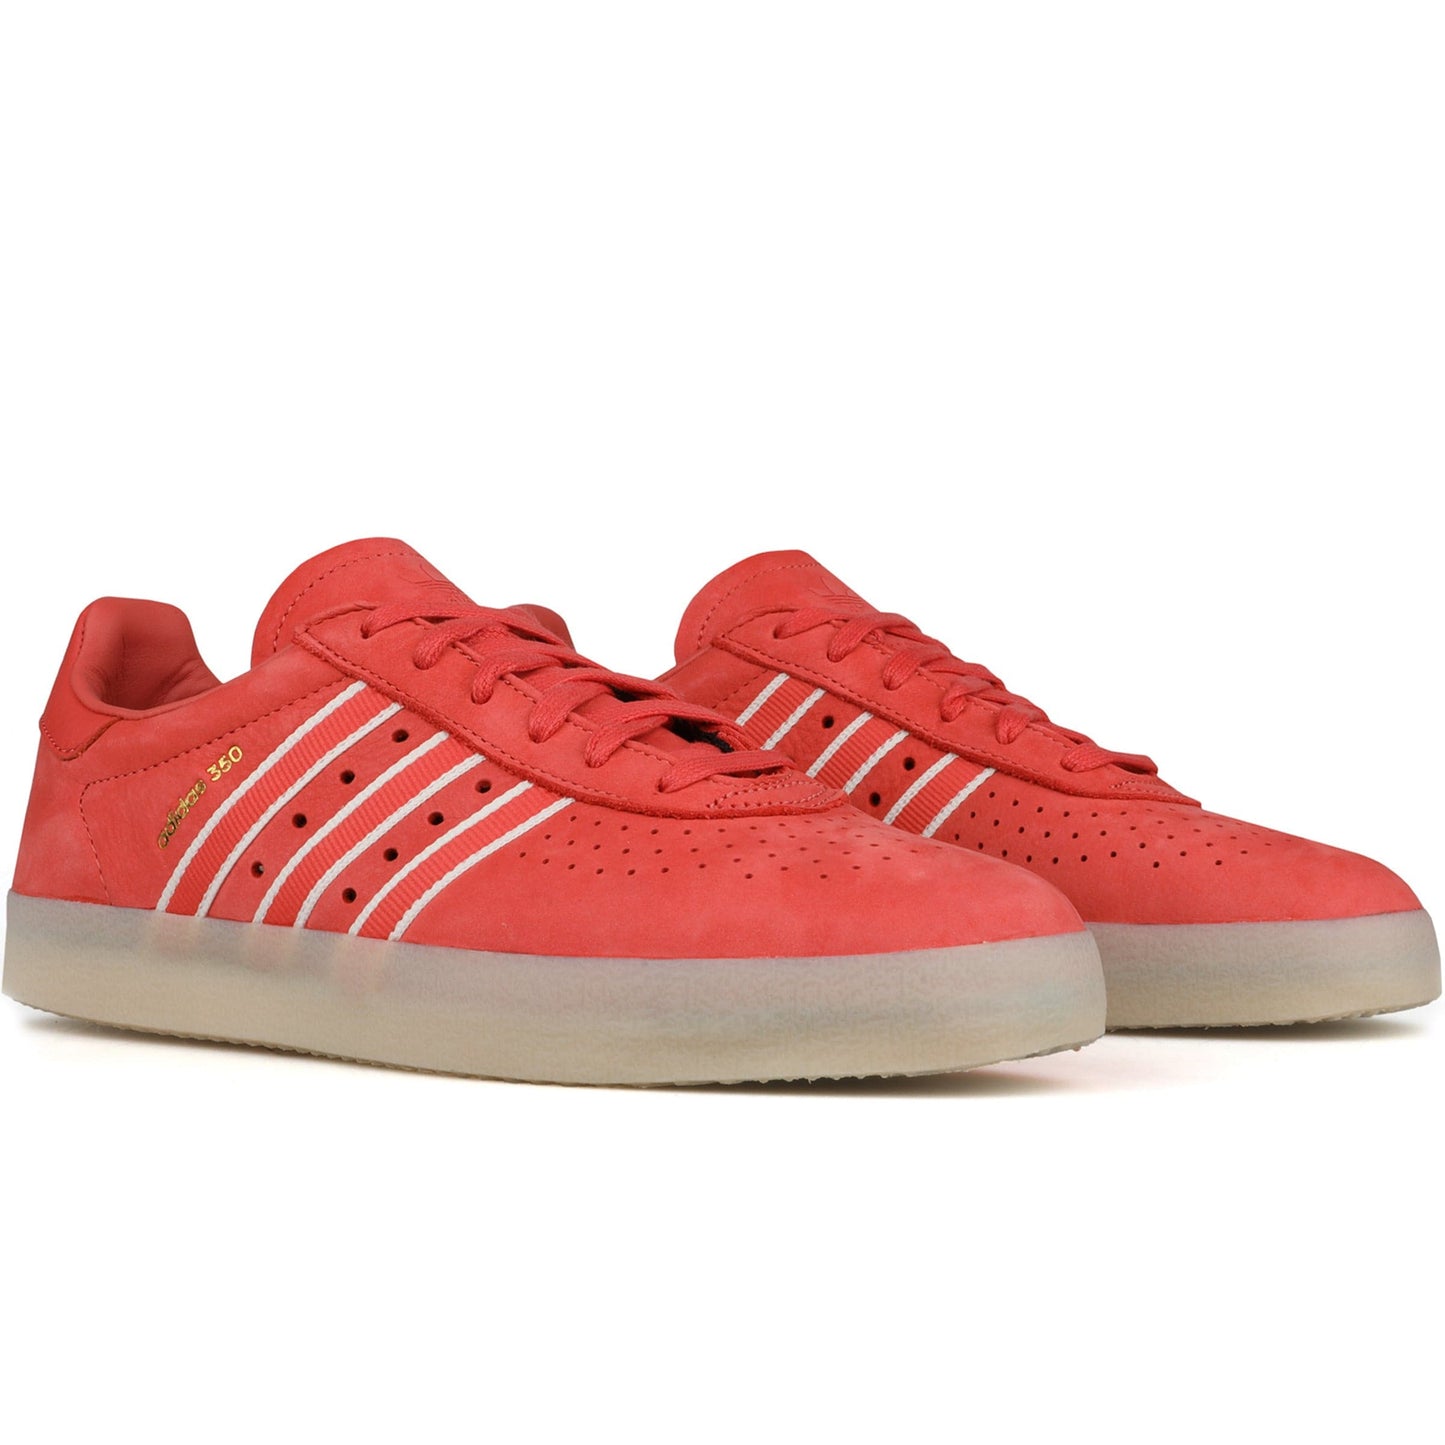 Adidas Sneakers TSCA/CWHT/GMT / 13.5 X OYSTER HOLDINGS 350